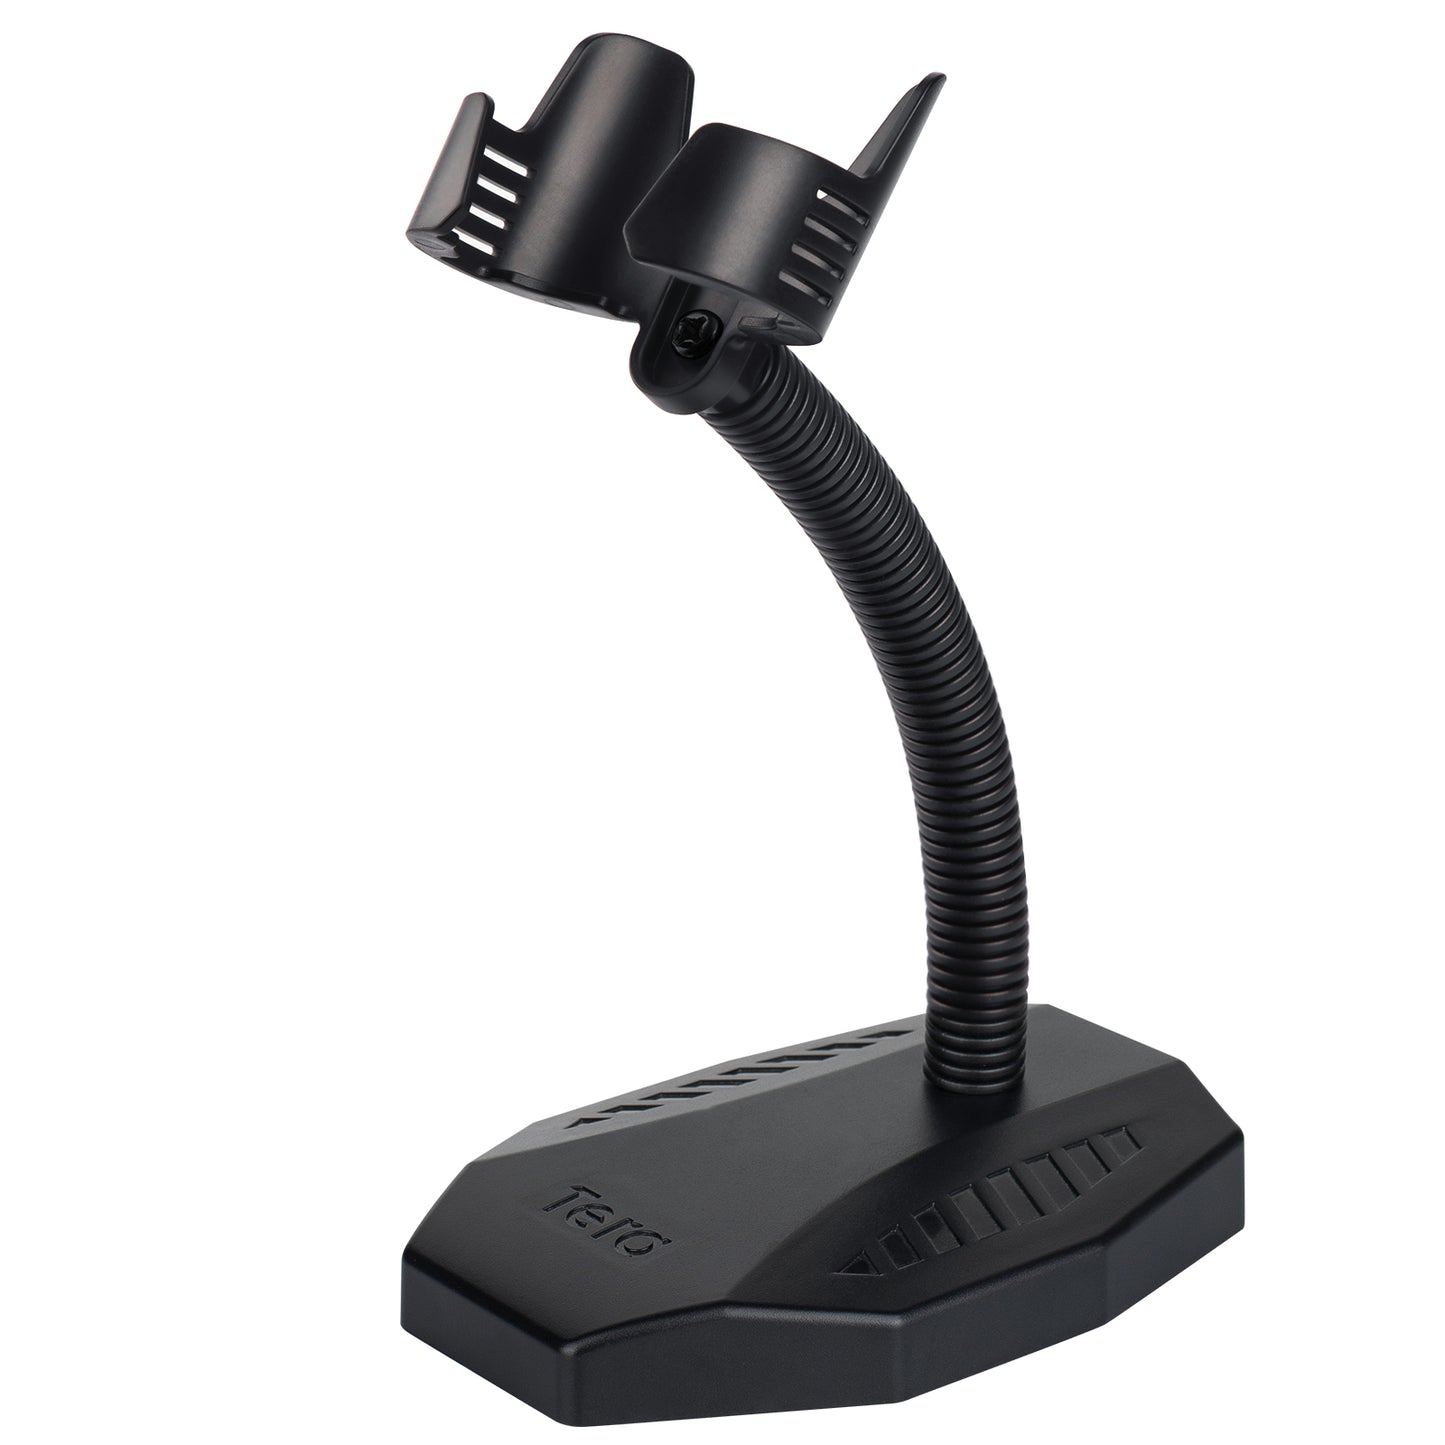 Tera Universal Stand for Barcode Scanners